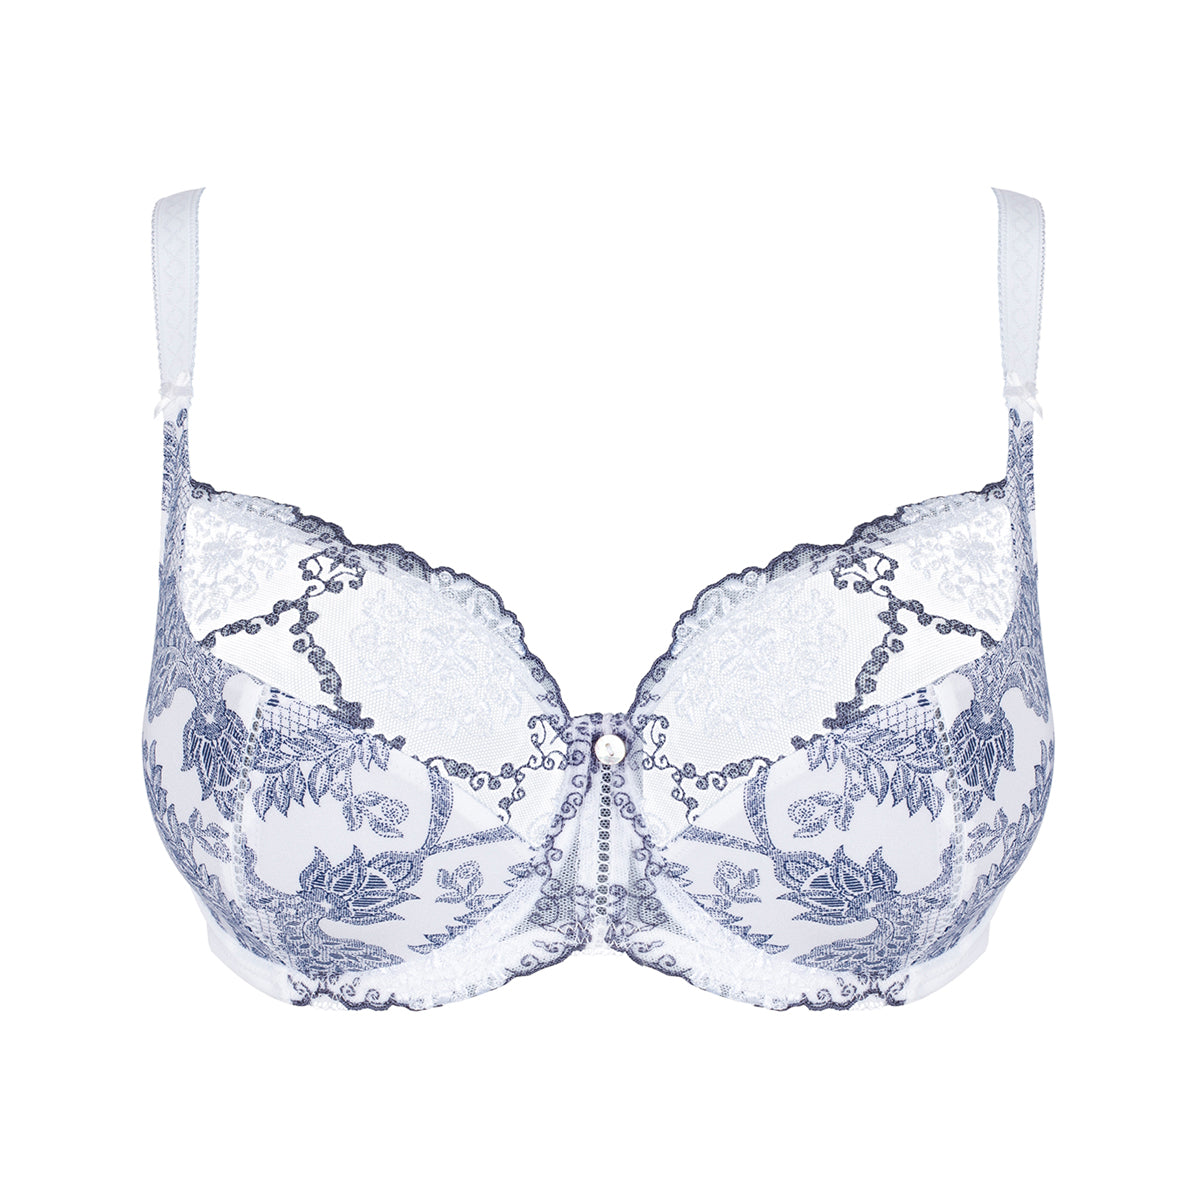 Exclusive big cup bra, openwork lace, flowers, B to J-cup